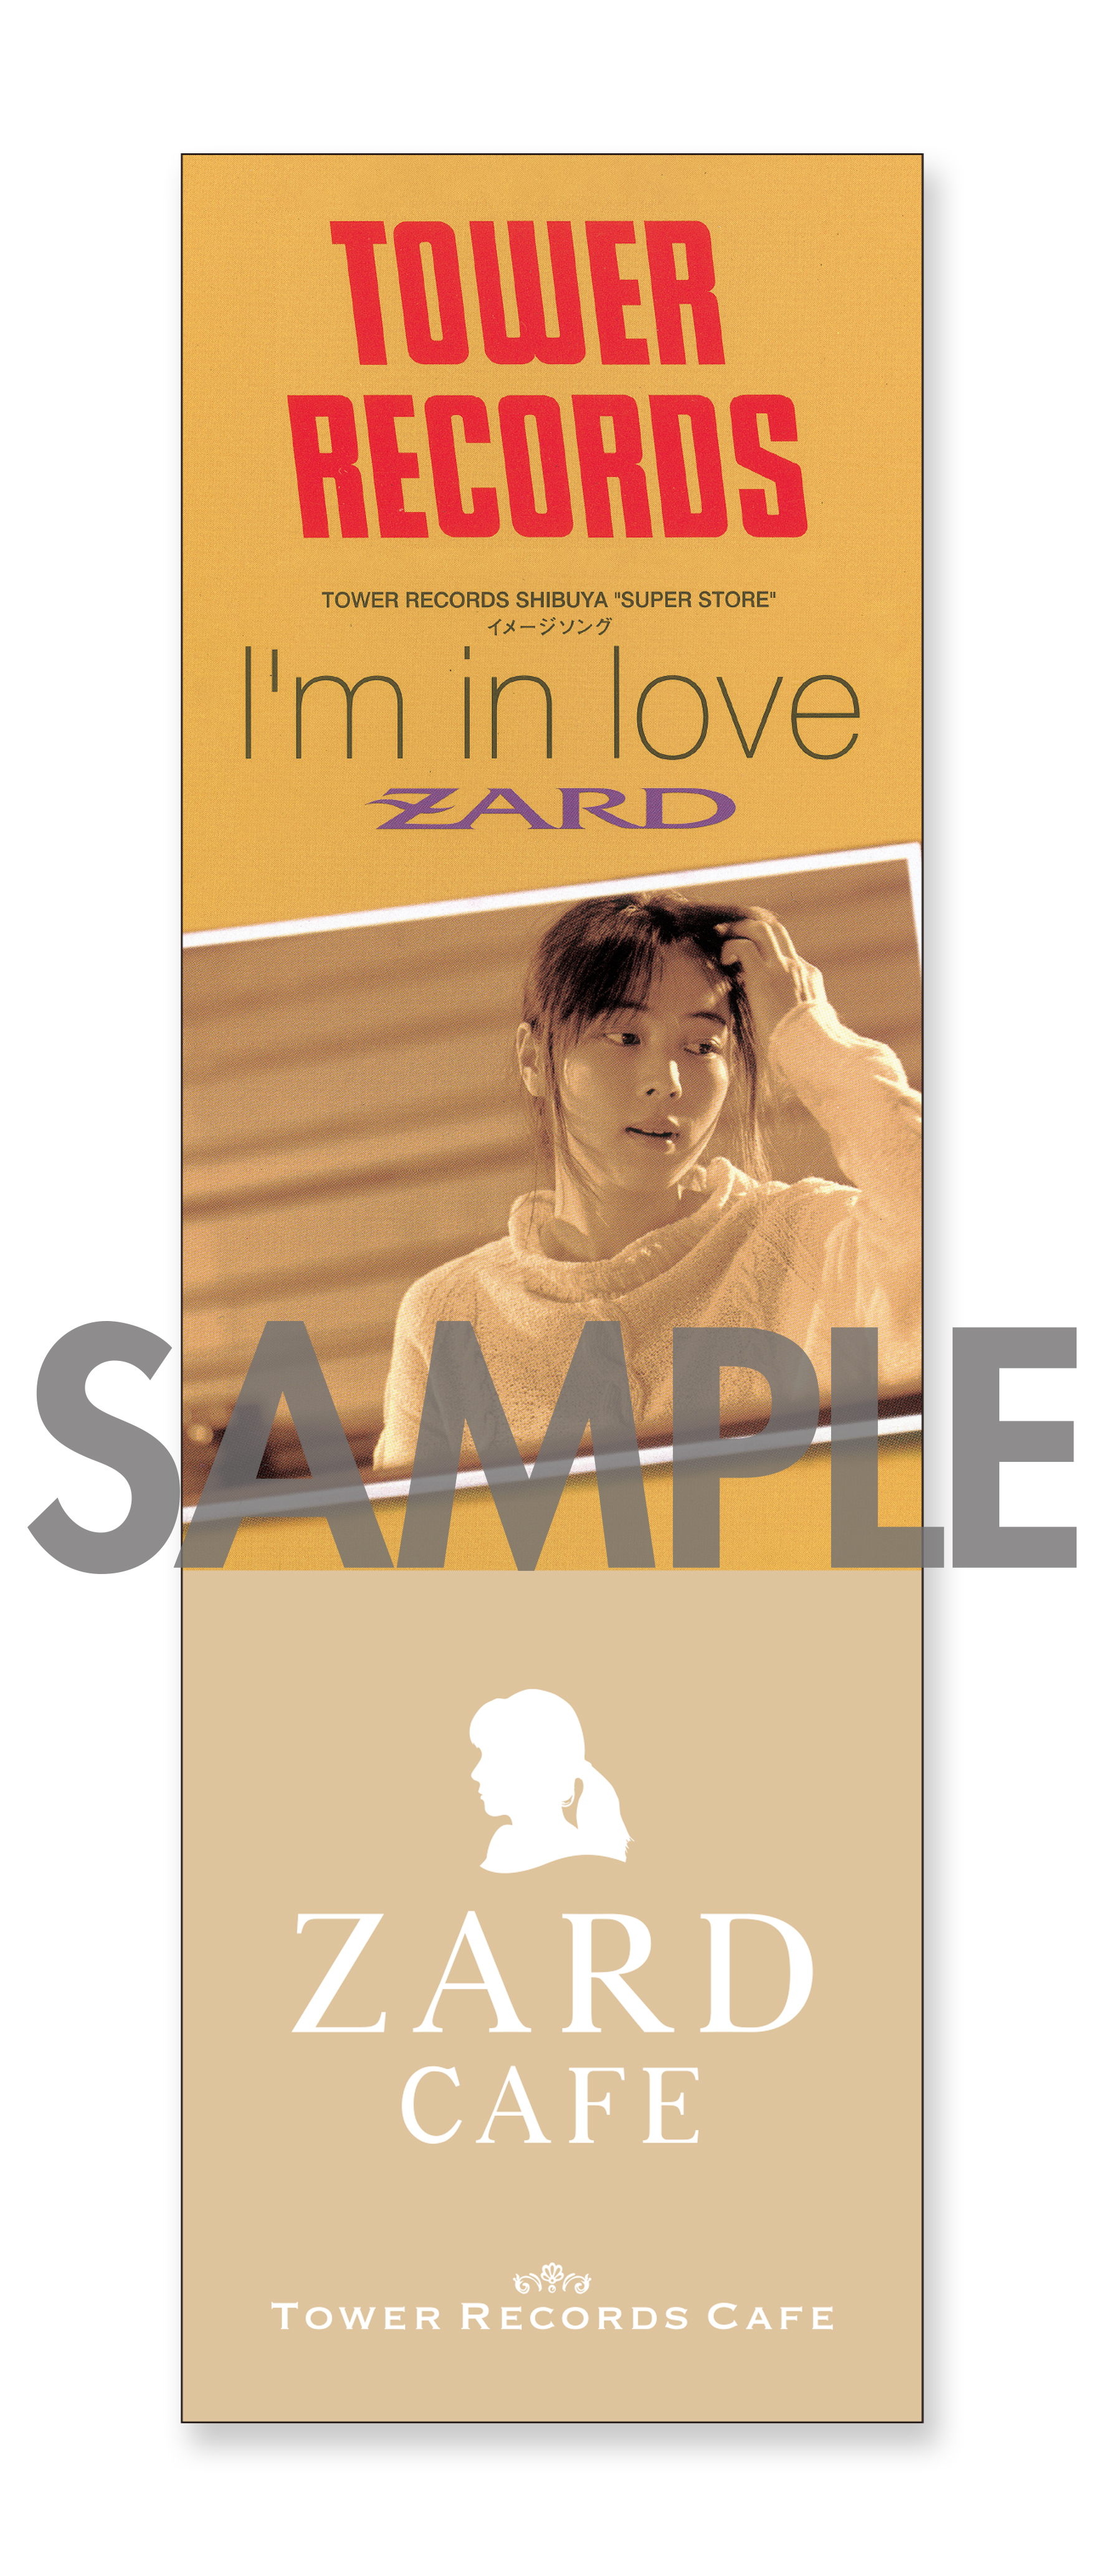 ◎ZARD CAFE◎TOWER RECORDS◎しおり3点セット◎坂井泉水